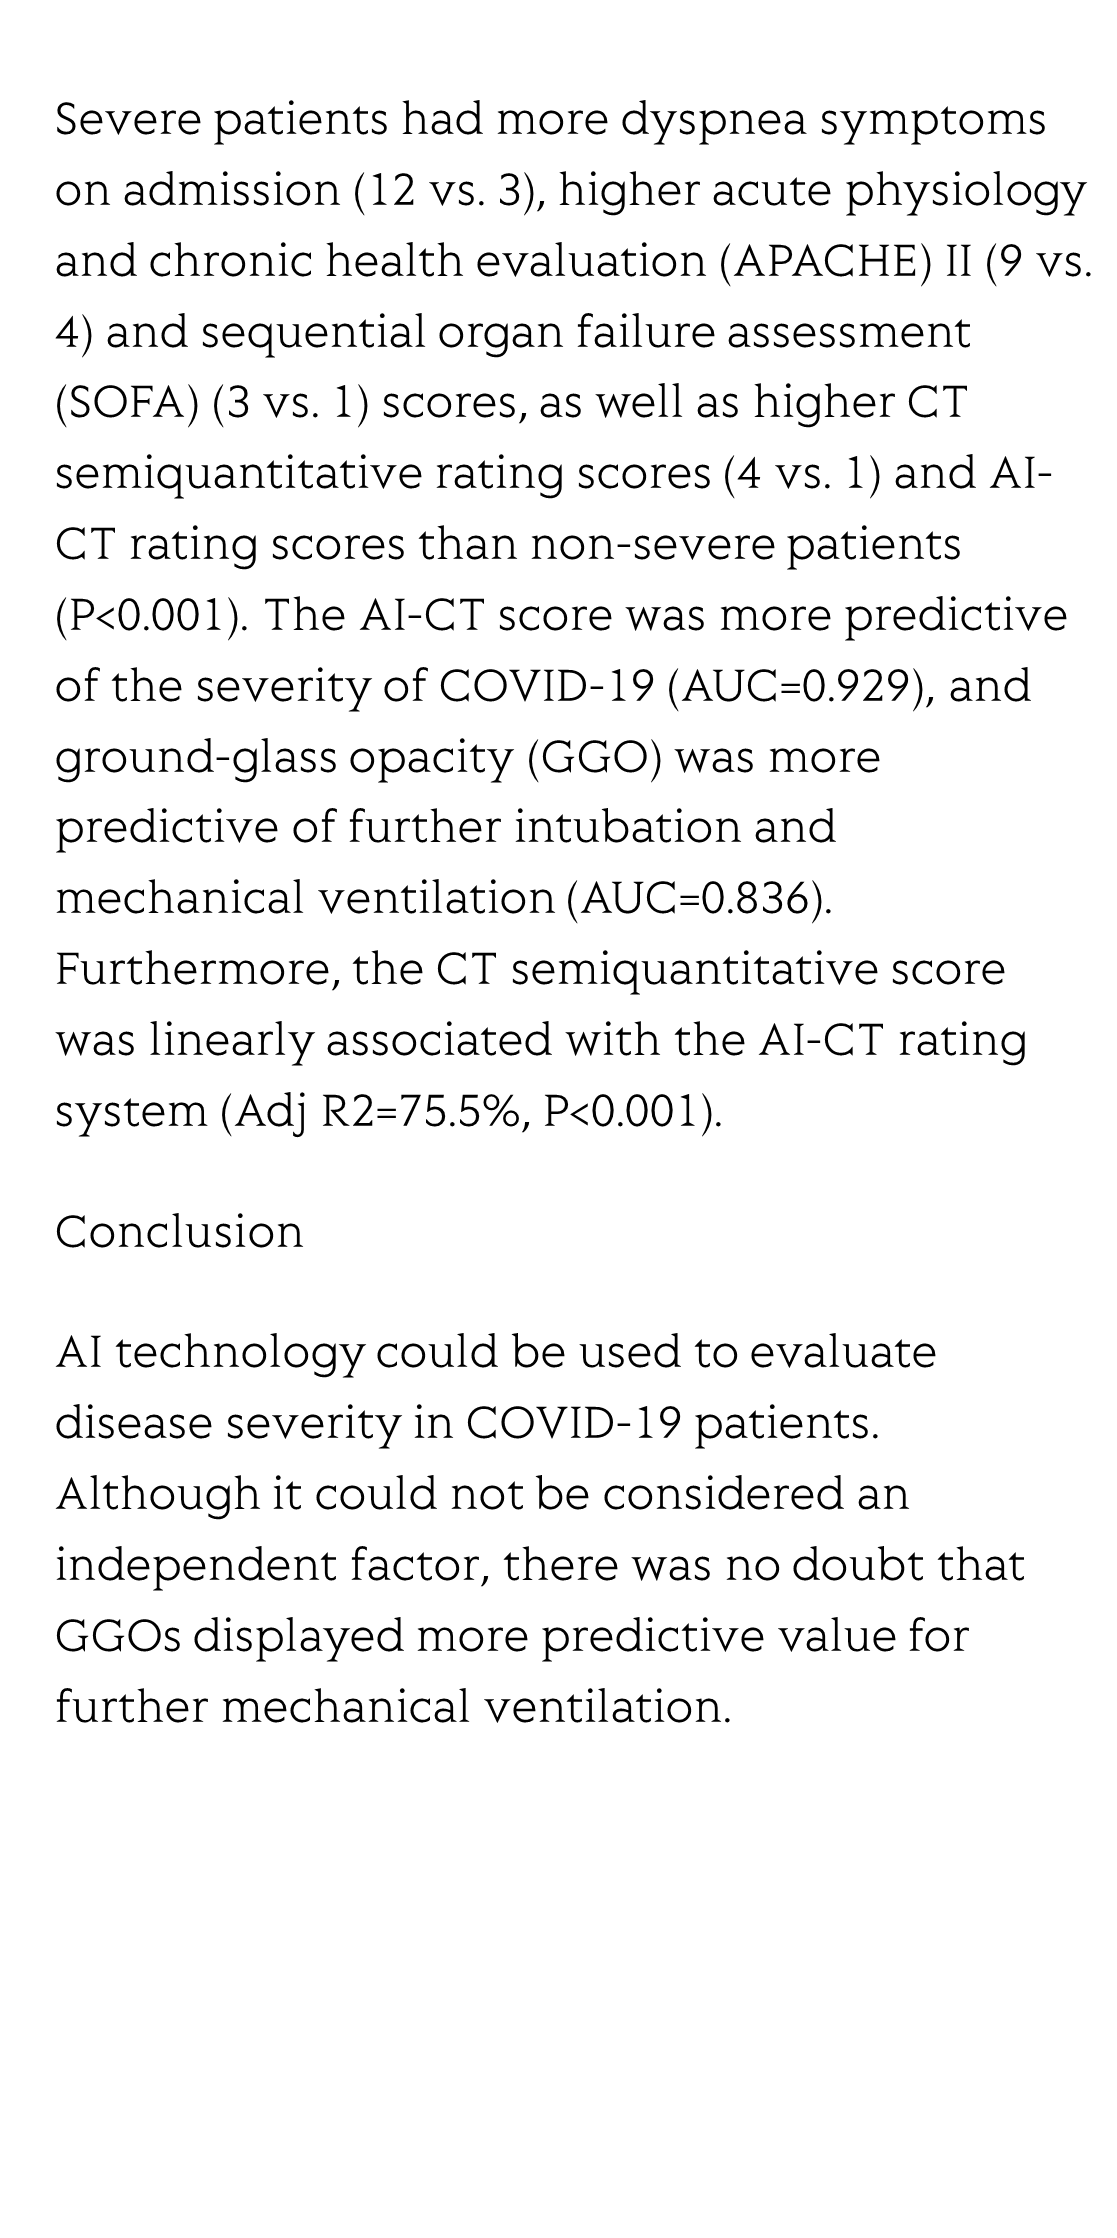 Artificial intelligence CT helps evaluate the severity of COVID-19 patients: A retrospective study_3